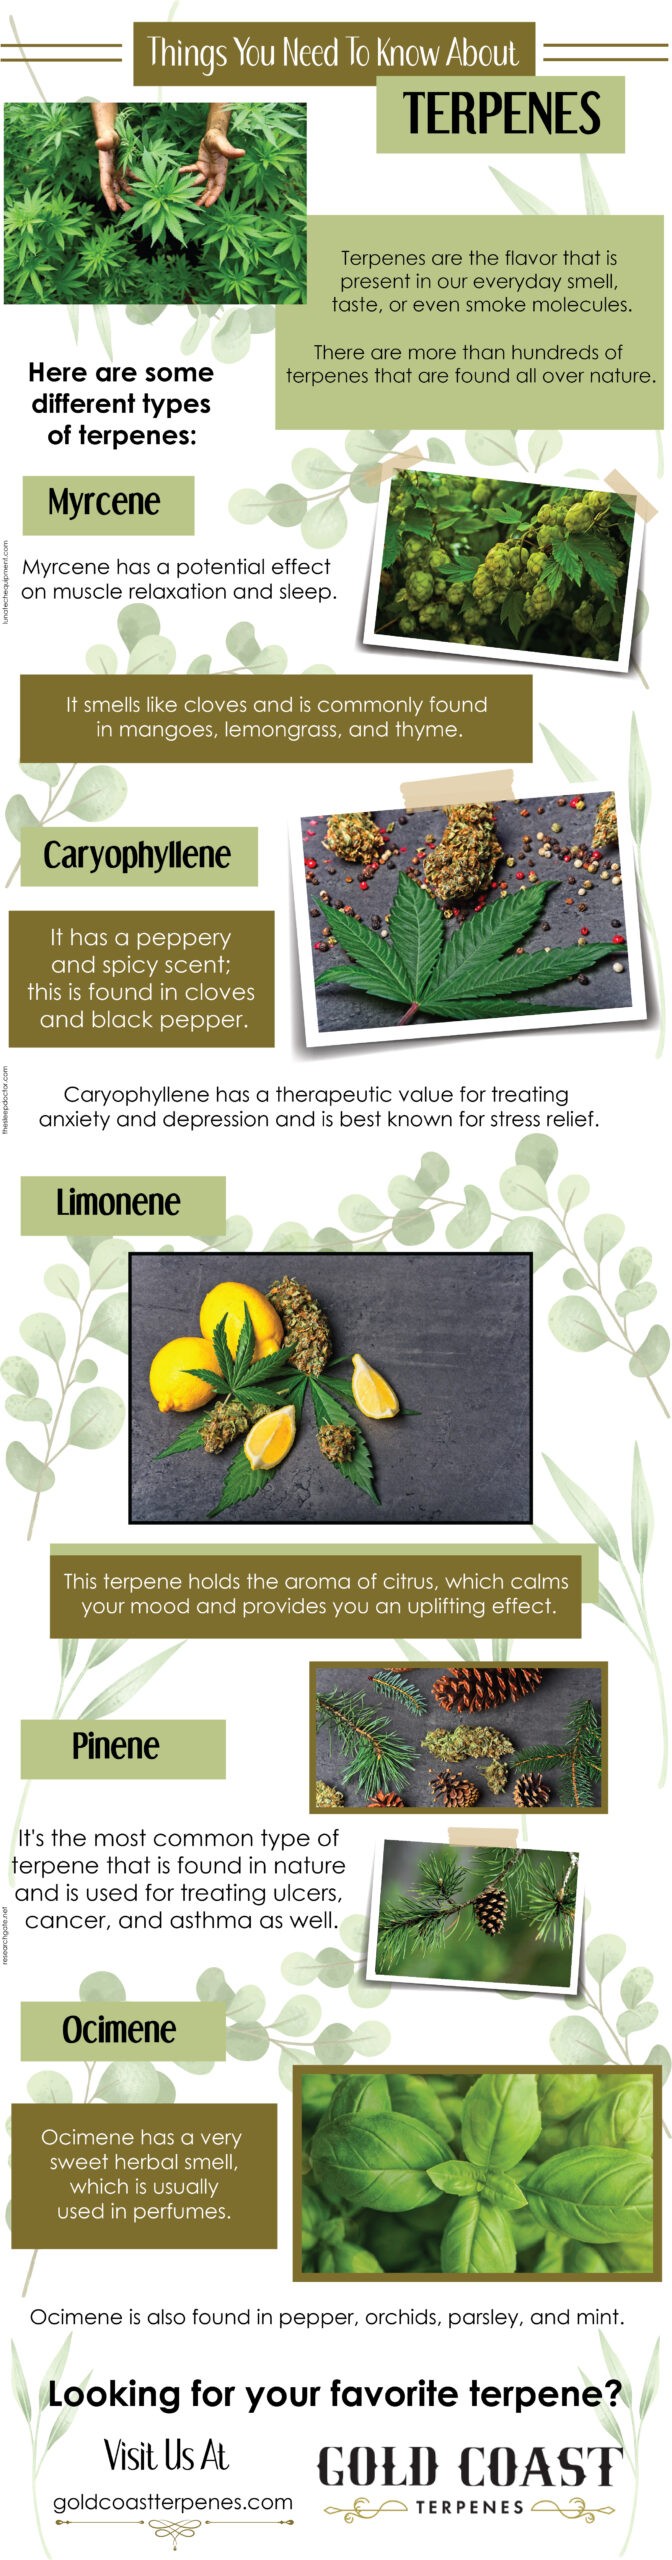 Things You Need To Know About Terpenes